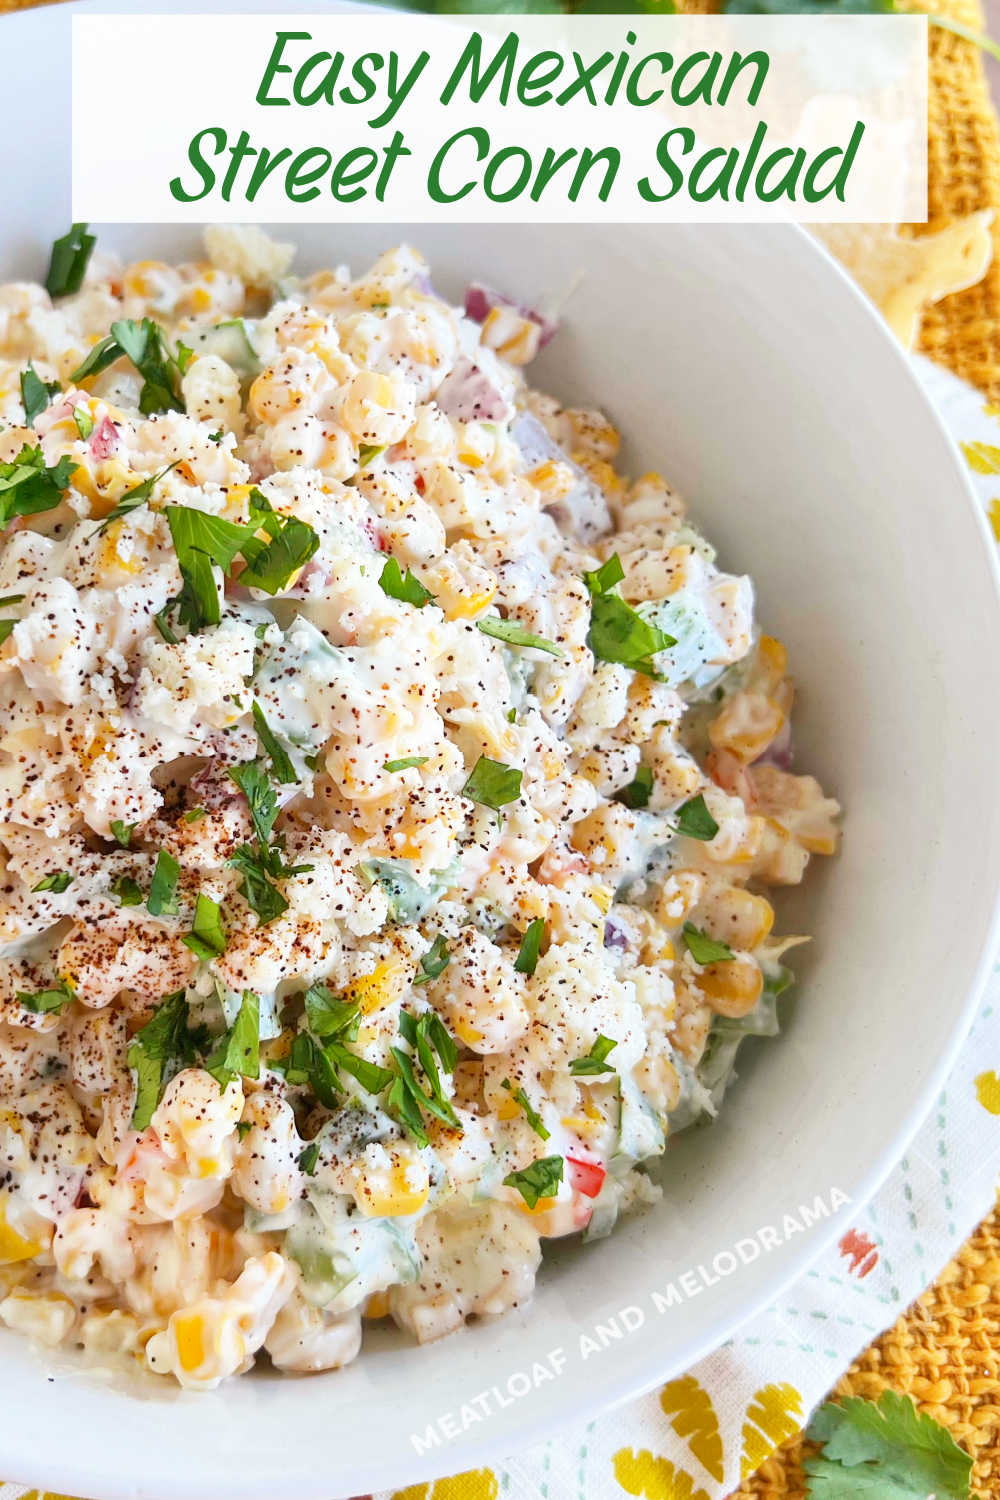 This Mexican Street Corn Salad recipe, sometimes called elote salad or esquites, is made with canned corn in a creamy dressing. This easy side dish is perfect for taco night or your next cookout. via @meamel